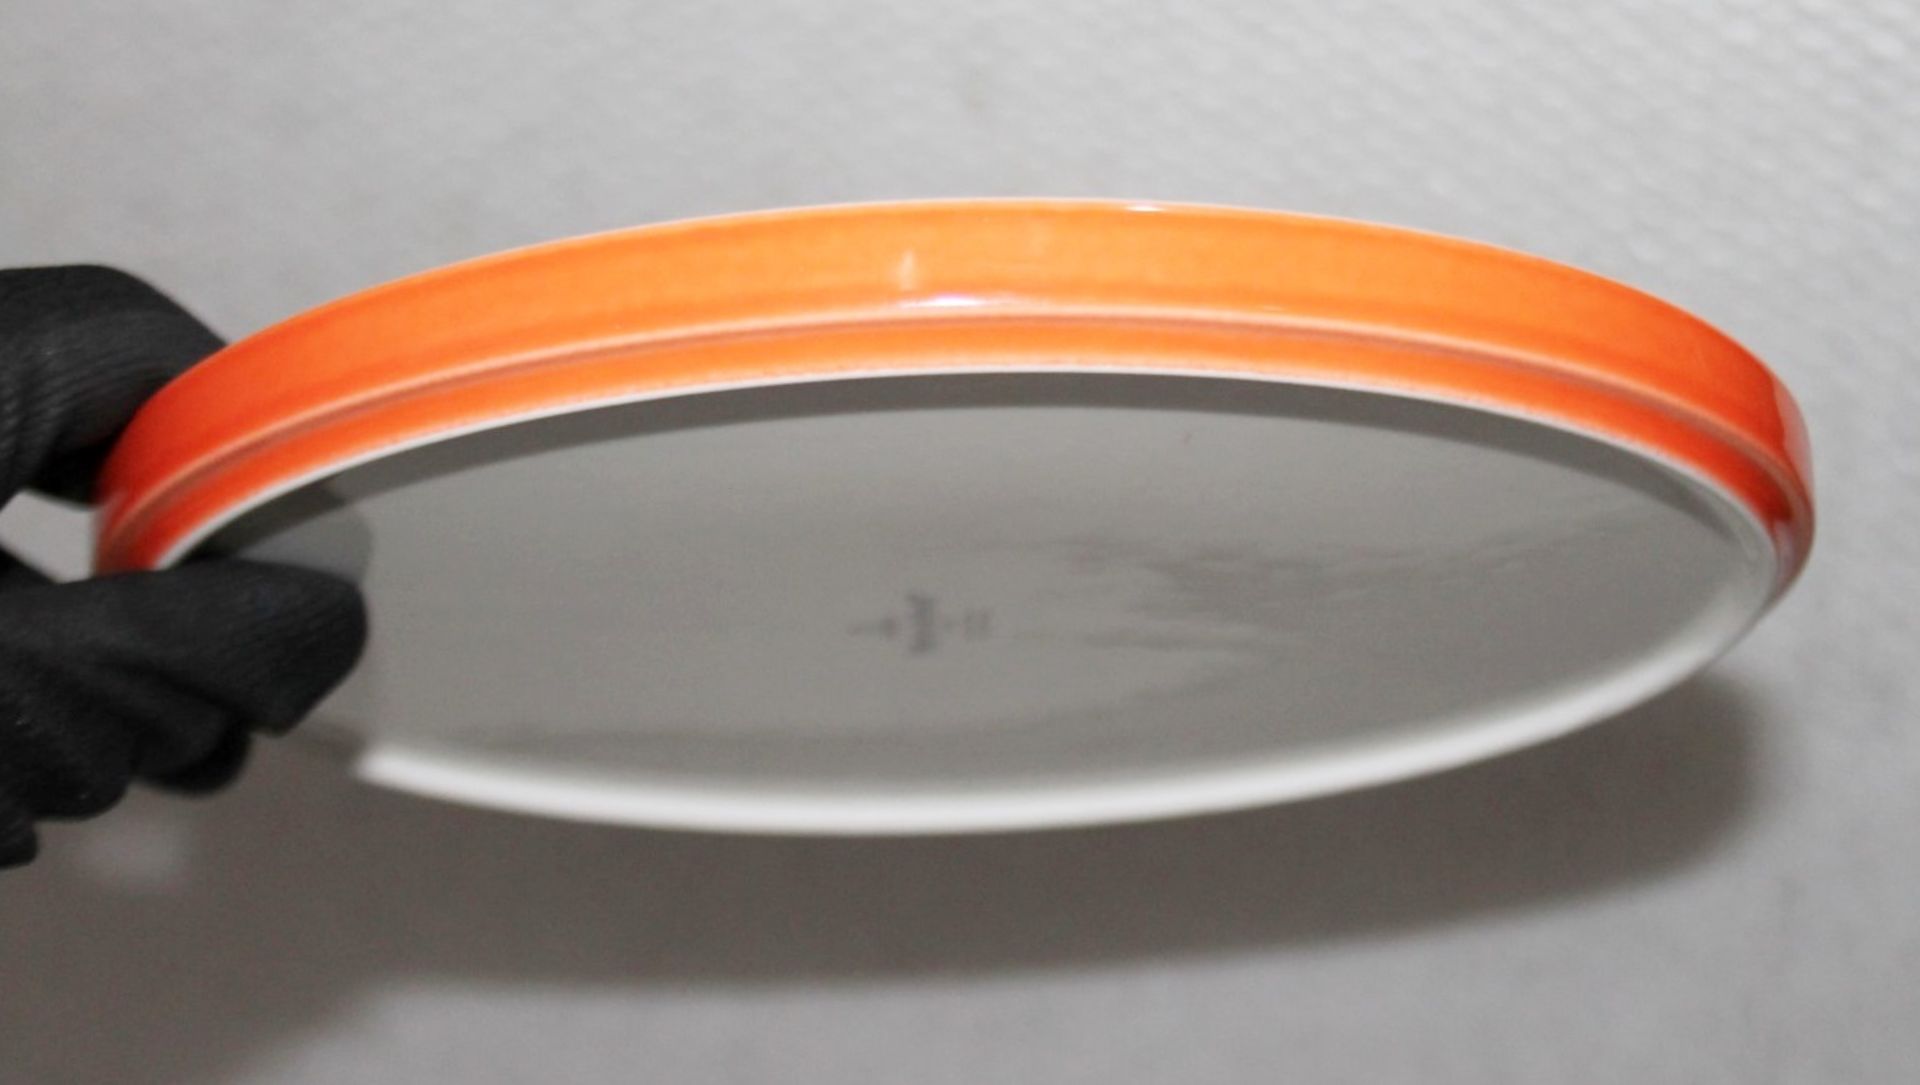 1 x VILLEROY & BOCH Porcelain ø24cm Universial Plate With An Orange Band - Unboxed Stock - Ref: - Image 2 of 5